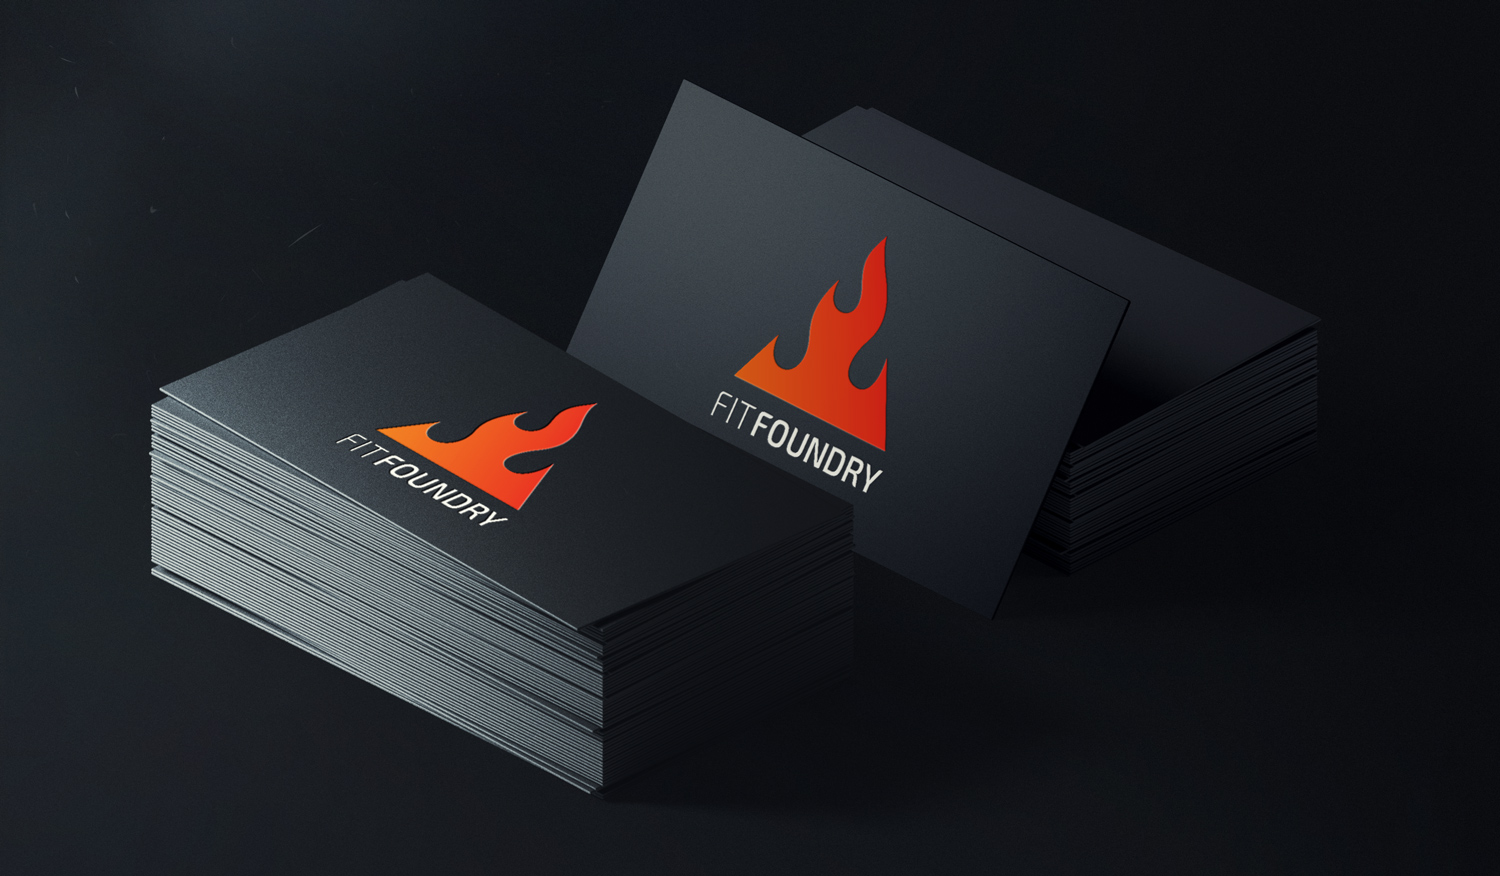 Client: Fit Foundry